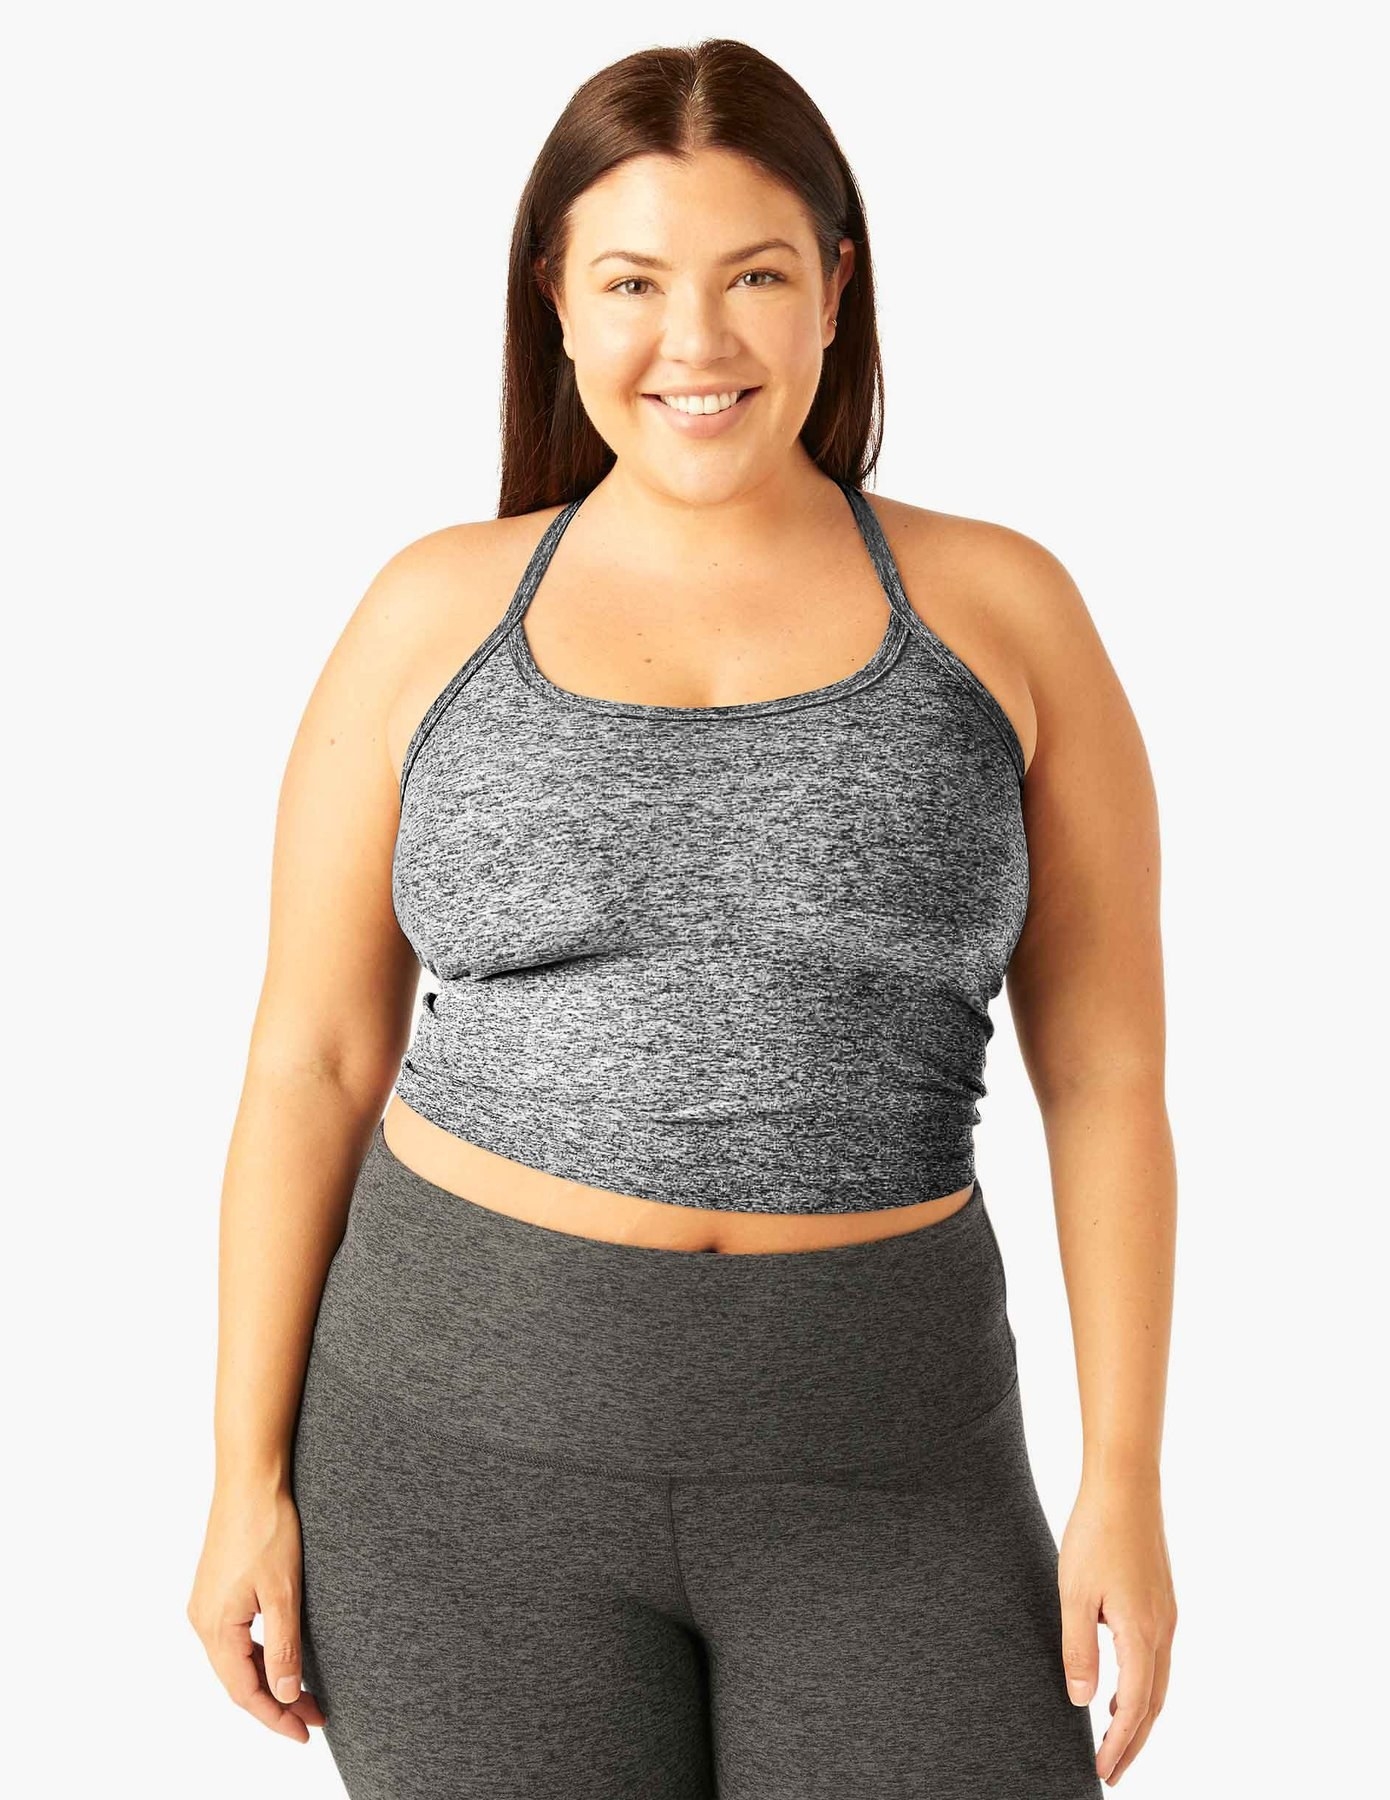 Comfy Space Dye Activewear: Zella, Aerie & Beyond Yoga Compared